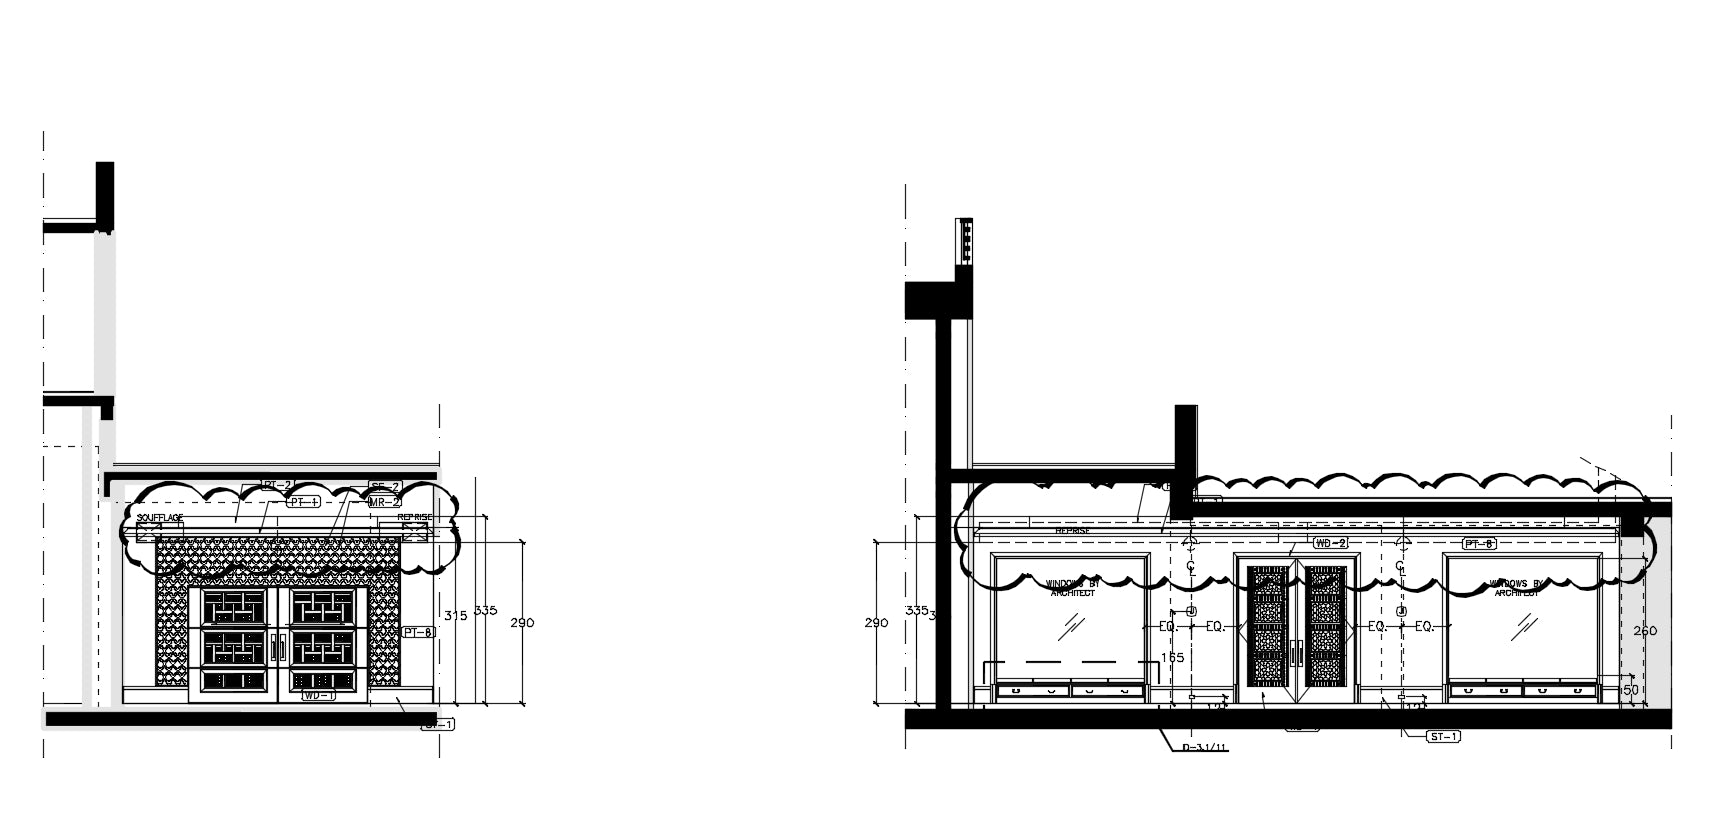 House drawing room interiors detail and design in cad